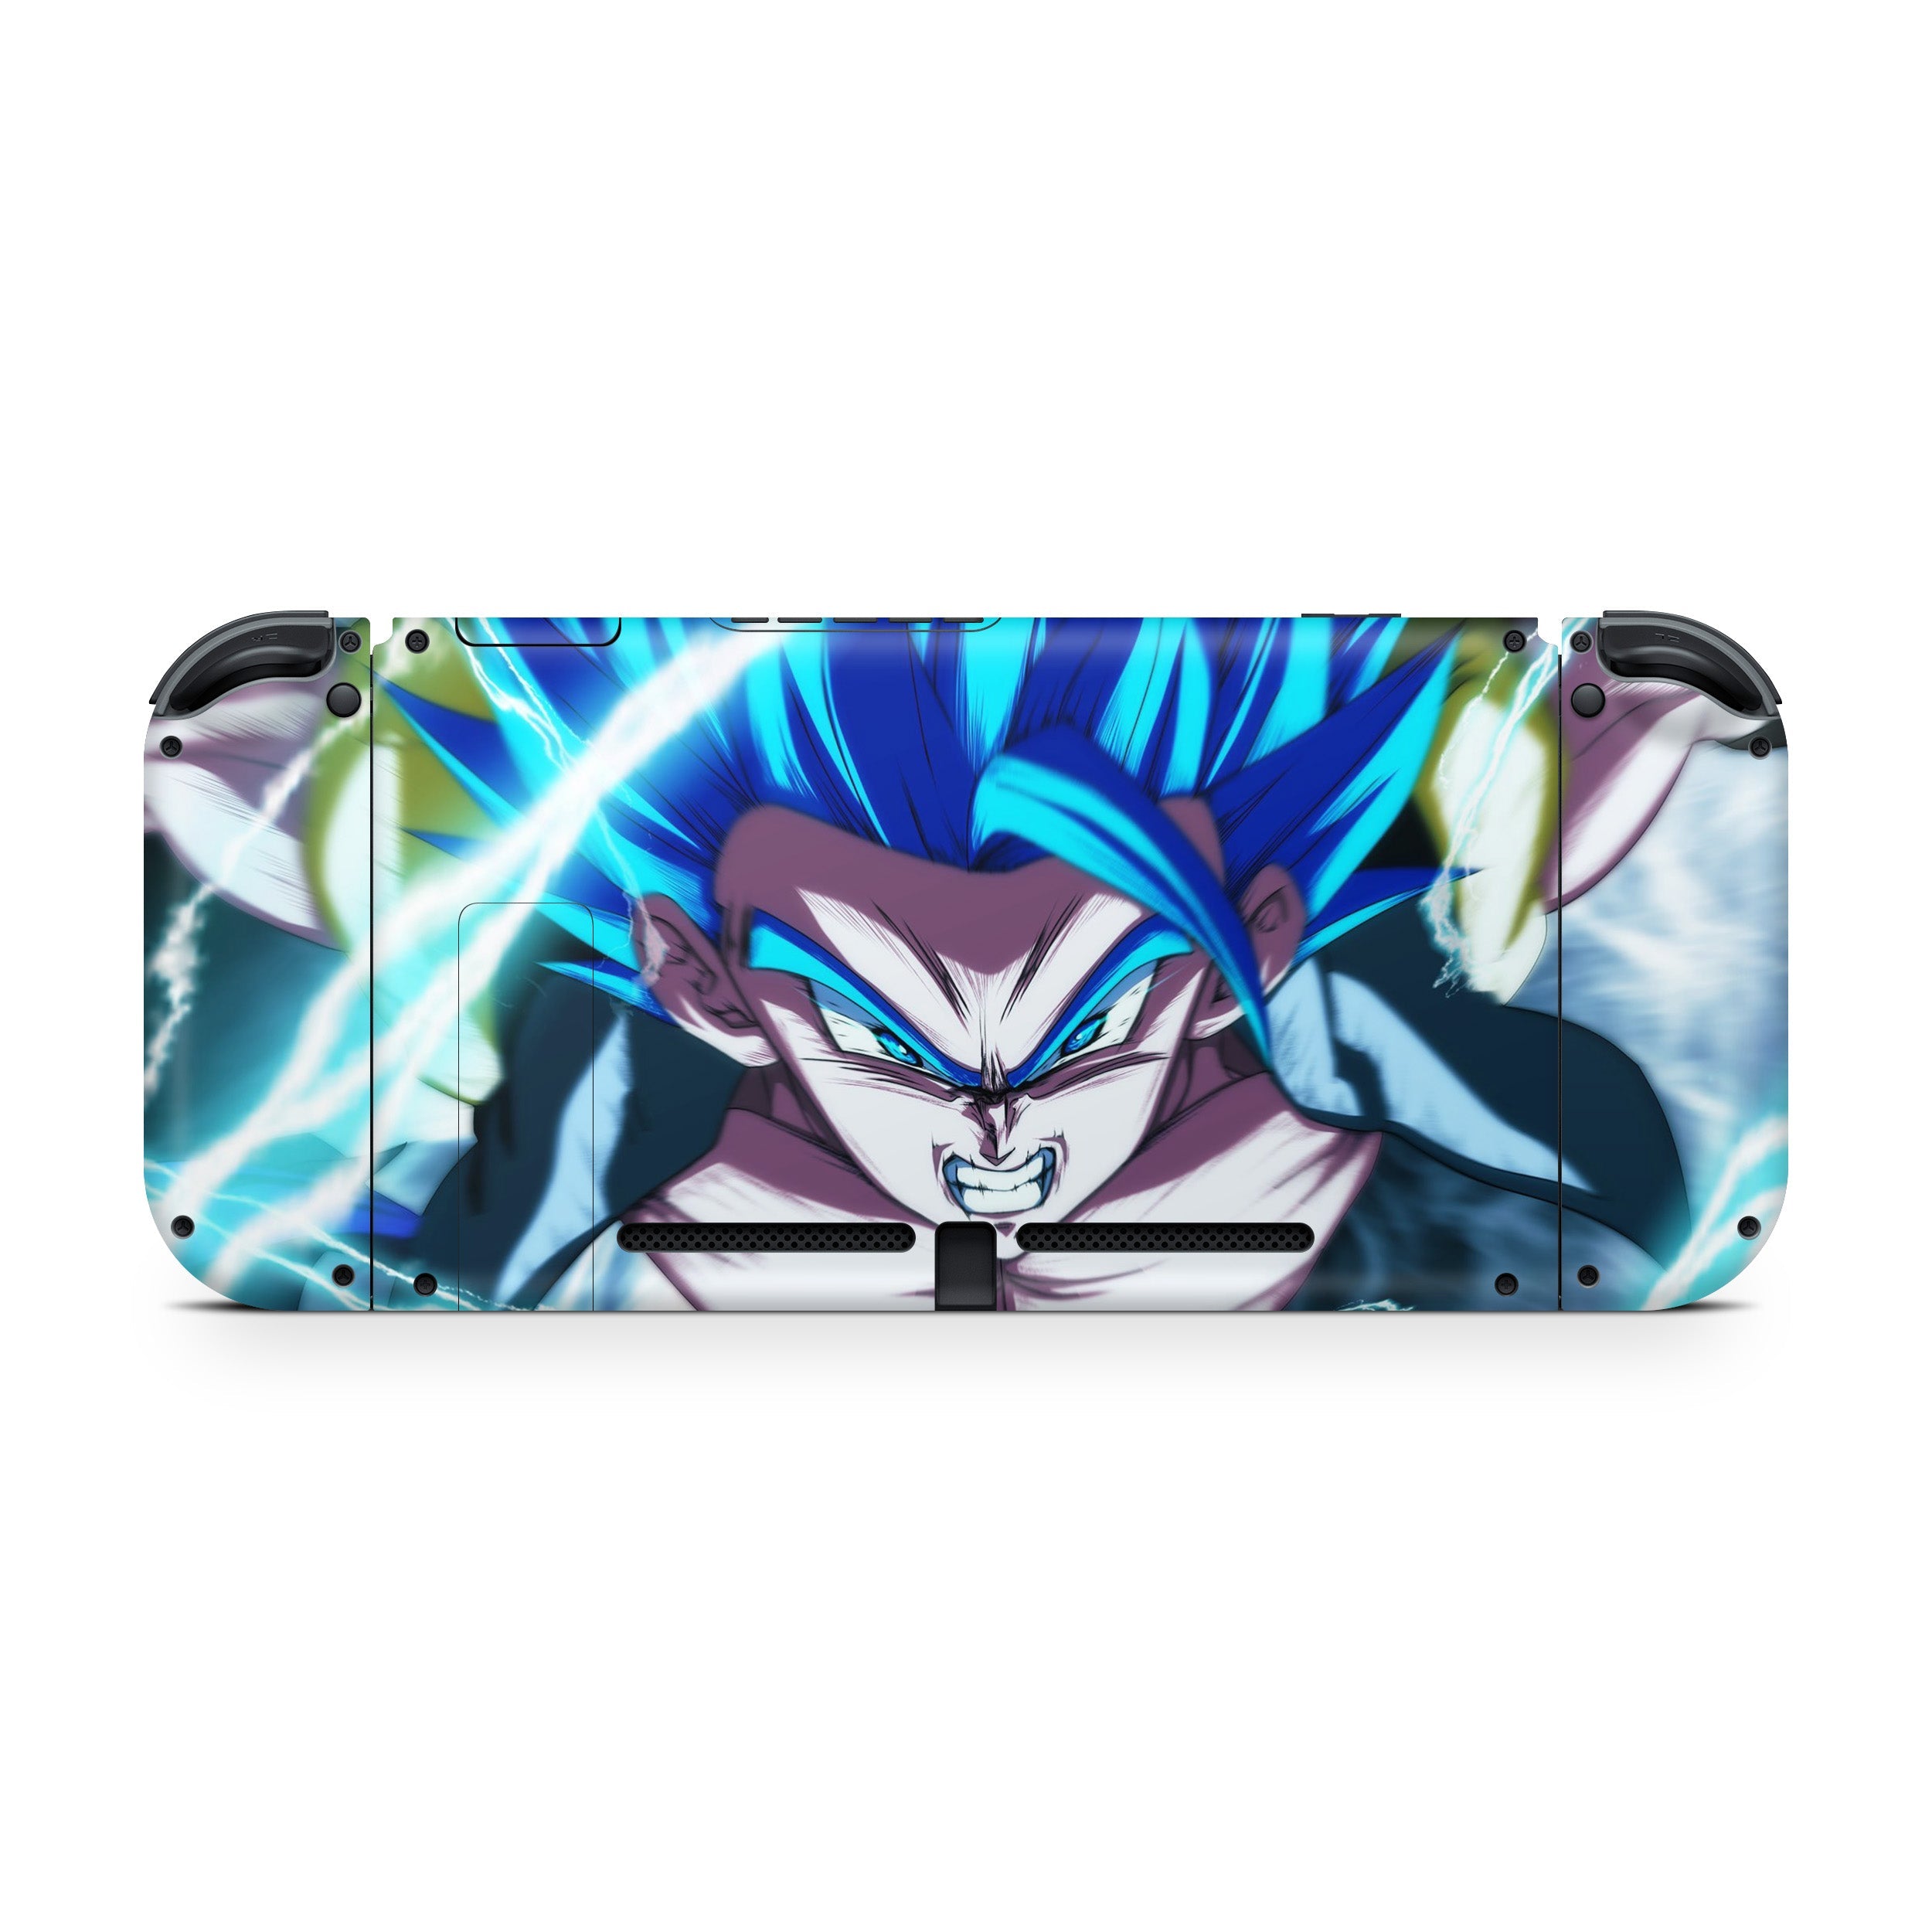 A video game skin featuring a Dragon Ball Super Gogeta design for the Nintendo Switch.